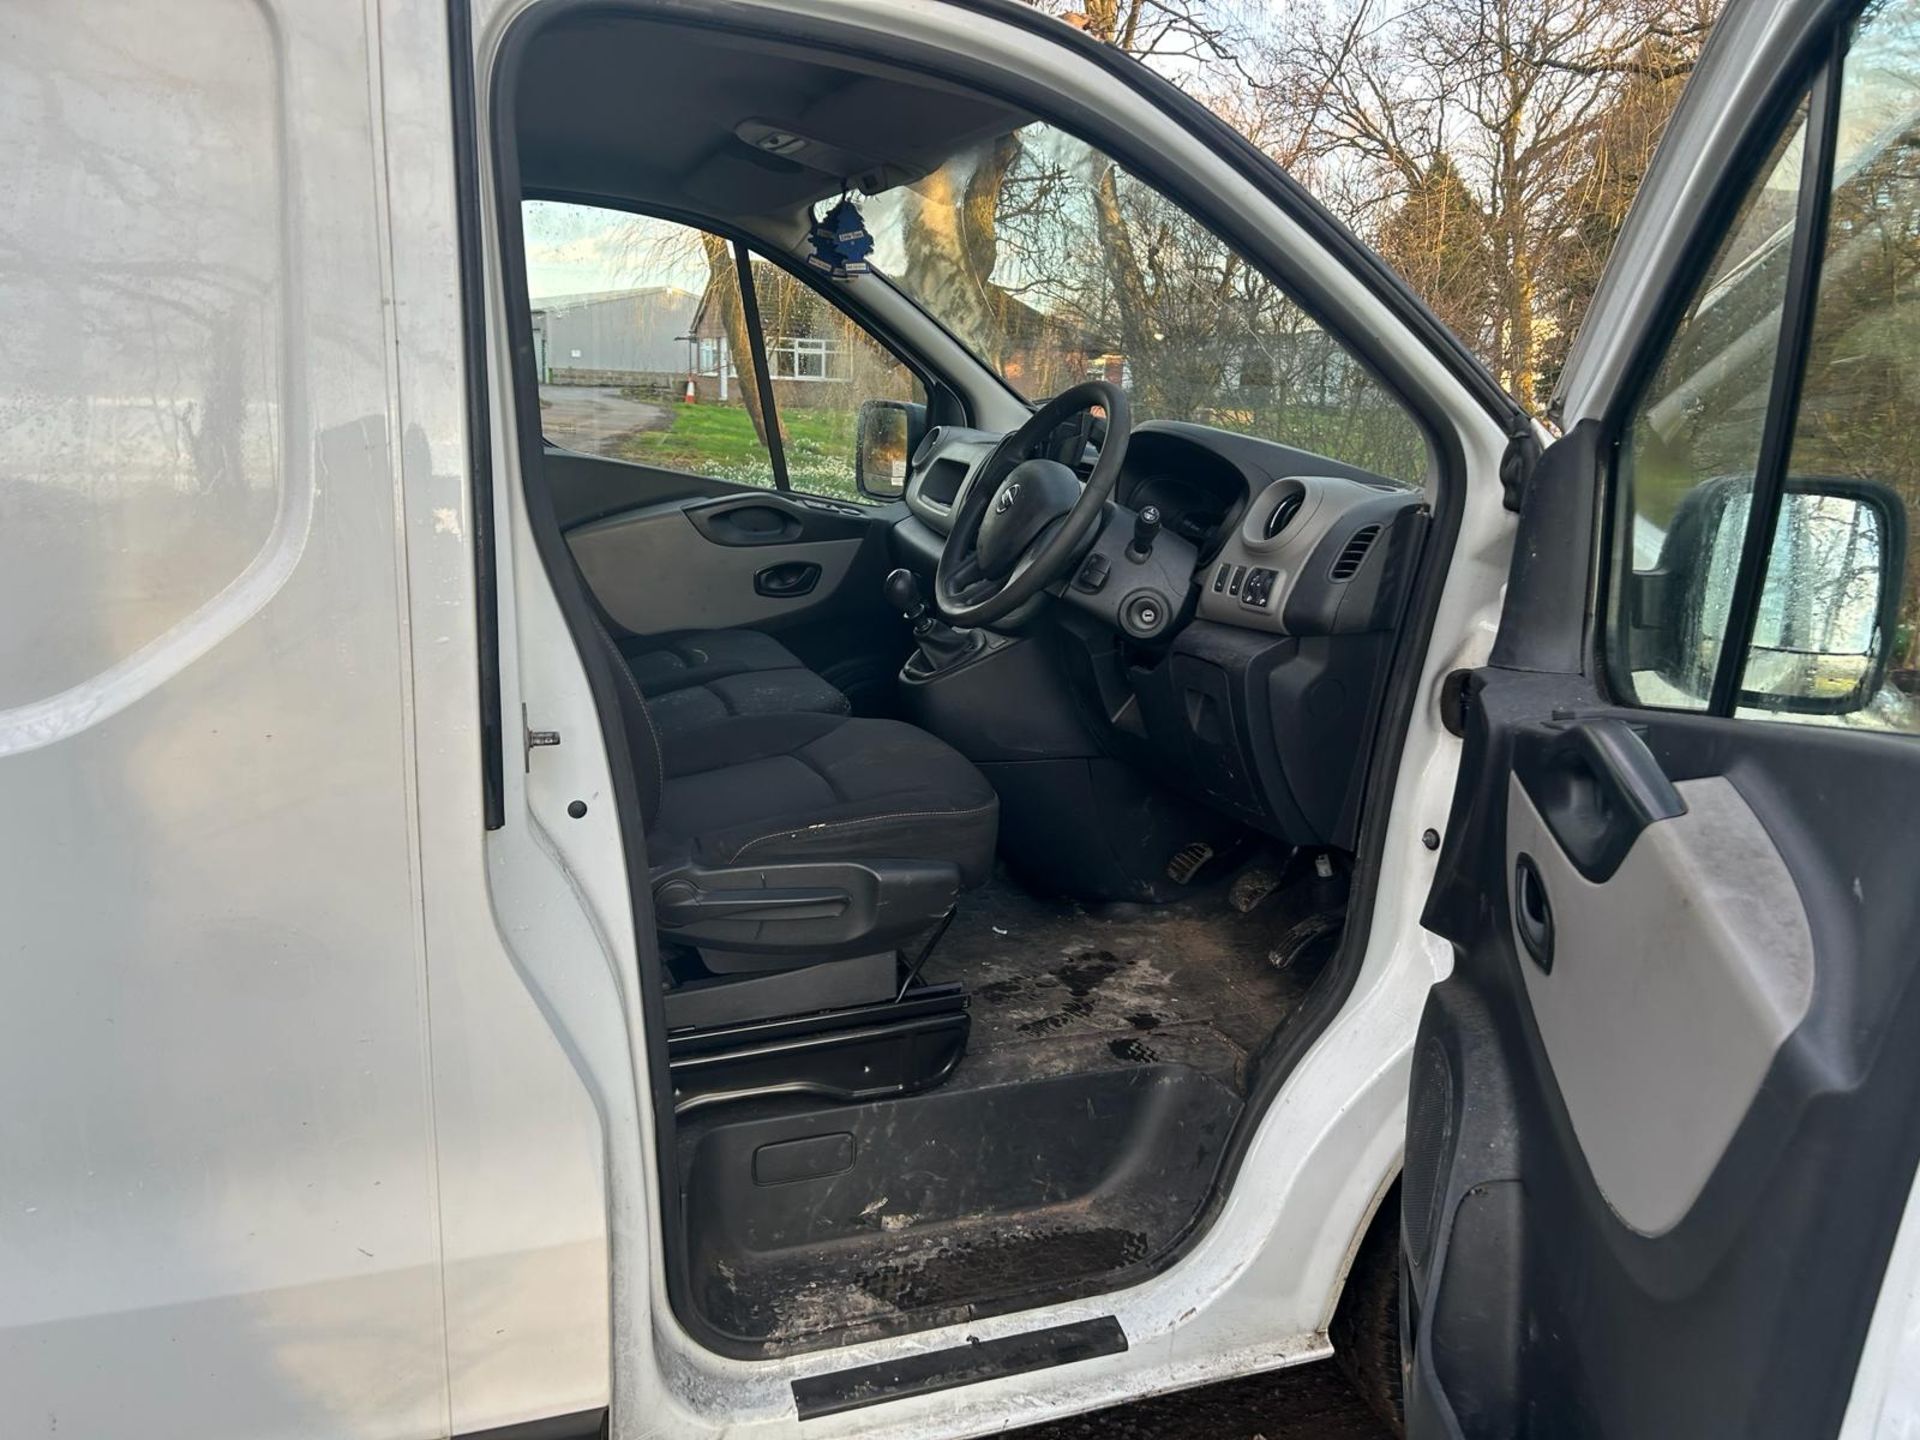 2018 18 NISSAN NV300 PANEL VAN - 106K MILES - AIR CON - EURO 6 - PLY LINED - Image 8 of 11